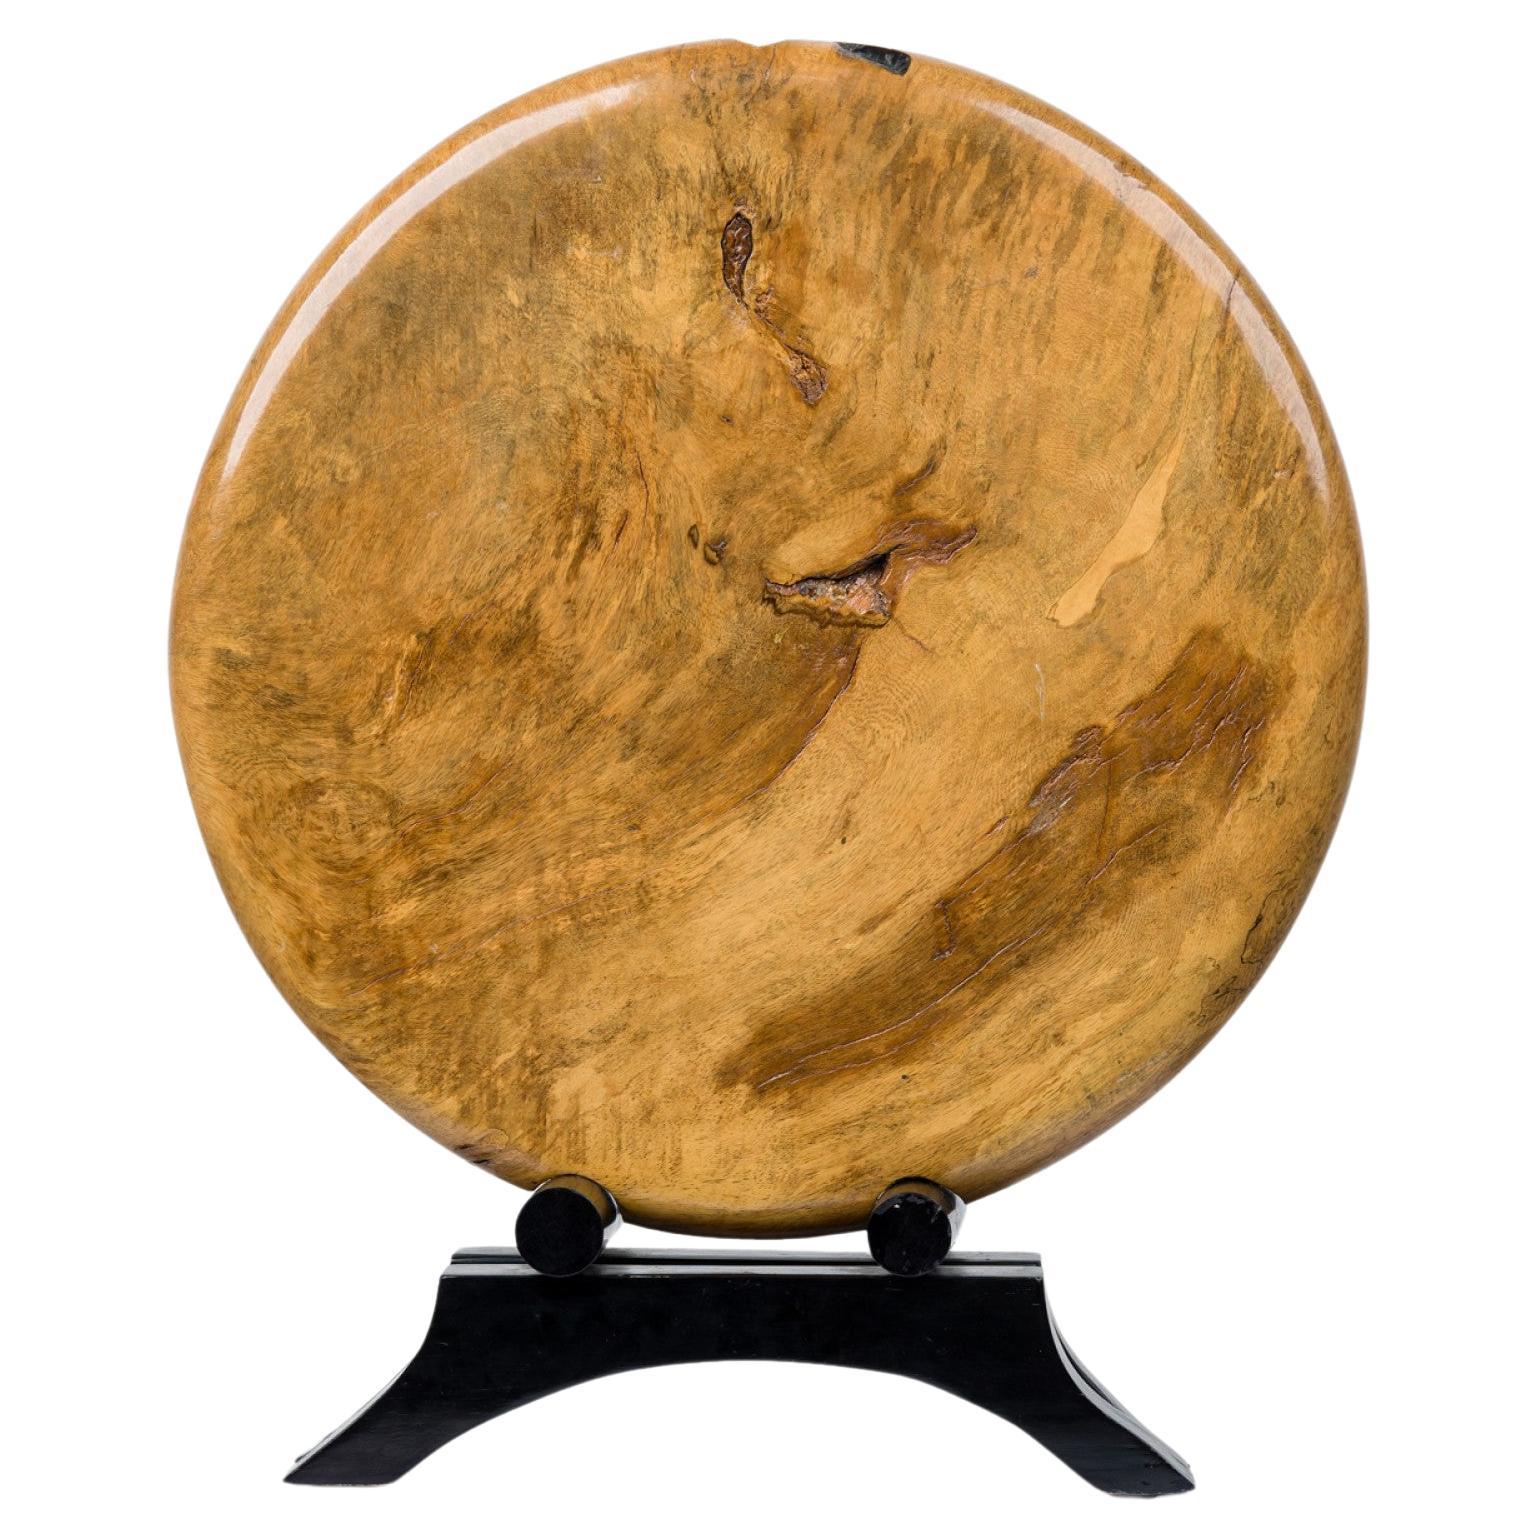 Contemporary American Modern Circular Wood Sculpture on Stand For Sale